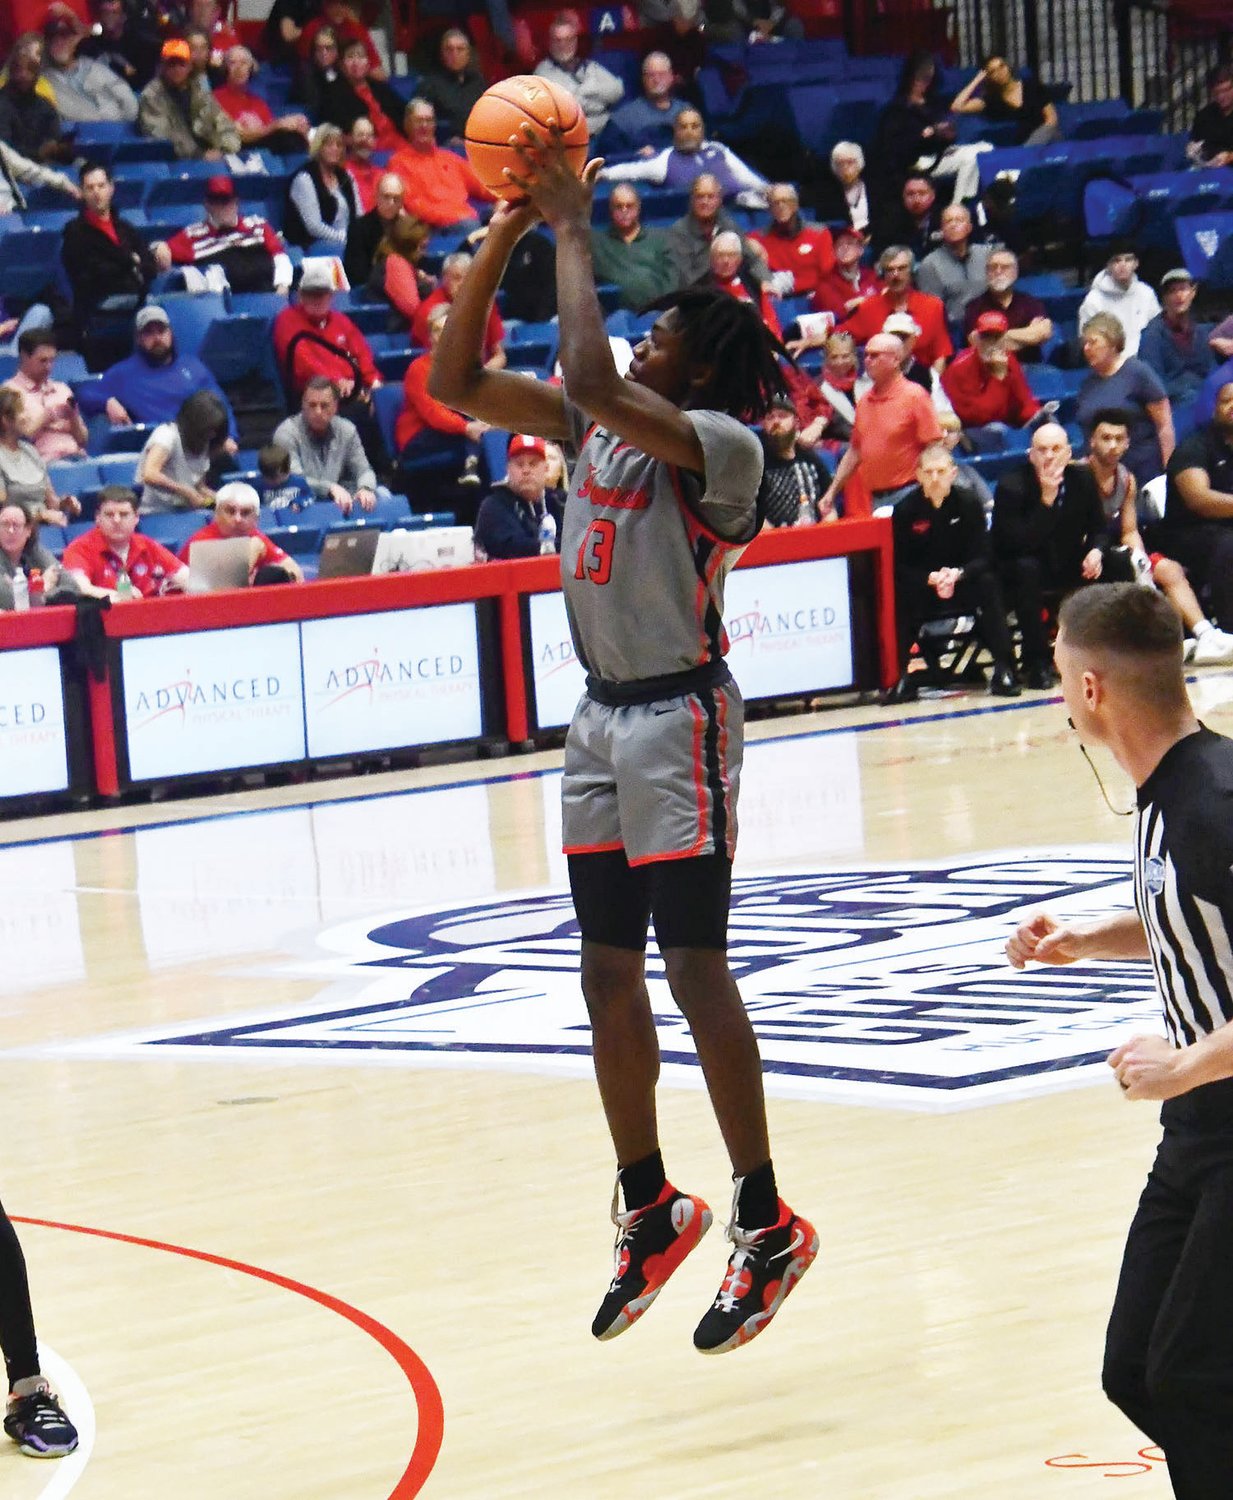 Ade Popoola attempts a 3-point shot during the first half of an NJCAA Division I tournament game versus Dodge City on March 22.